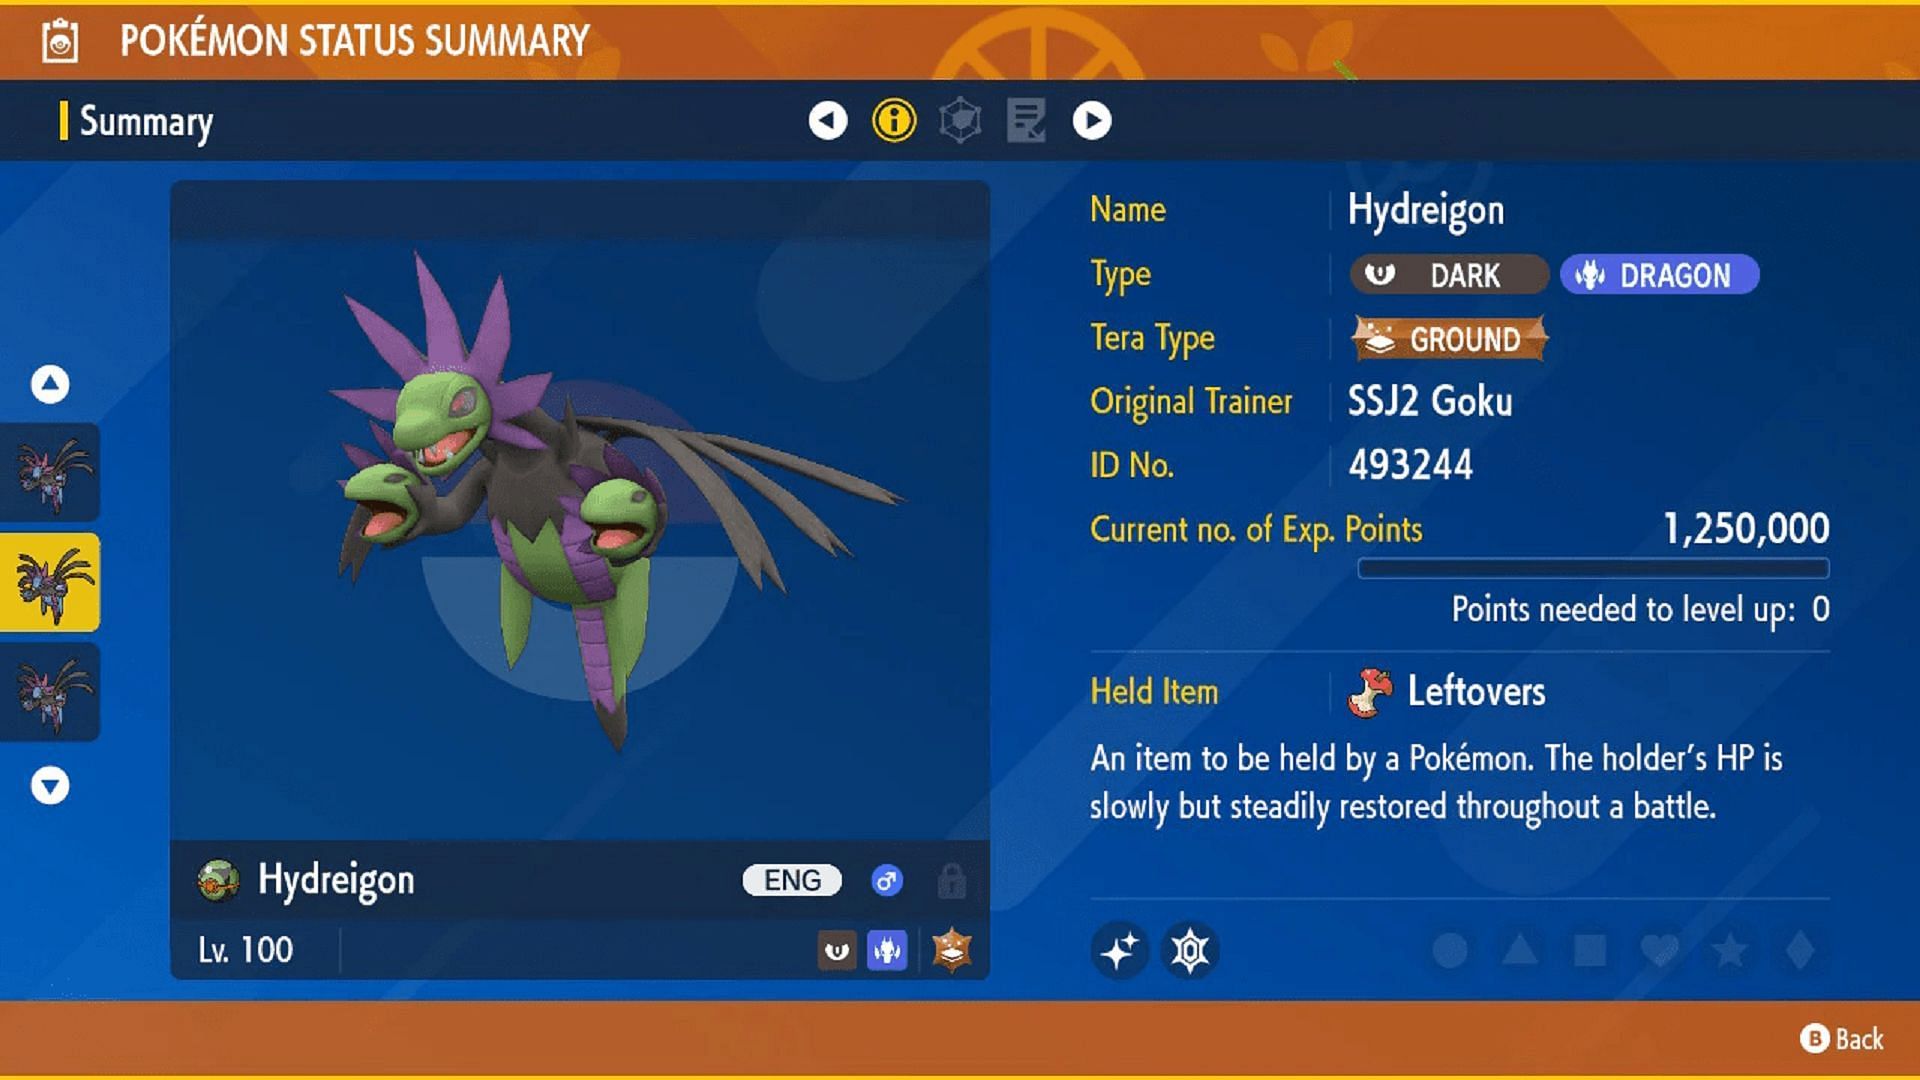 Shiny Hydreigon as it appears in the Pokedex in Pokemon Scarlet and Violet (Image via Game Freak)